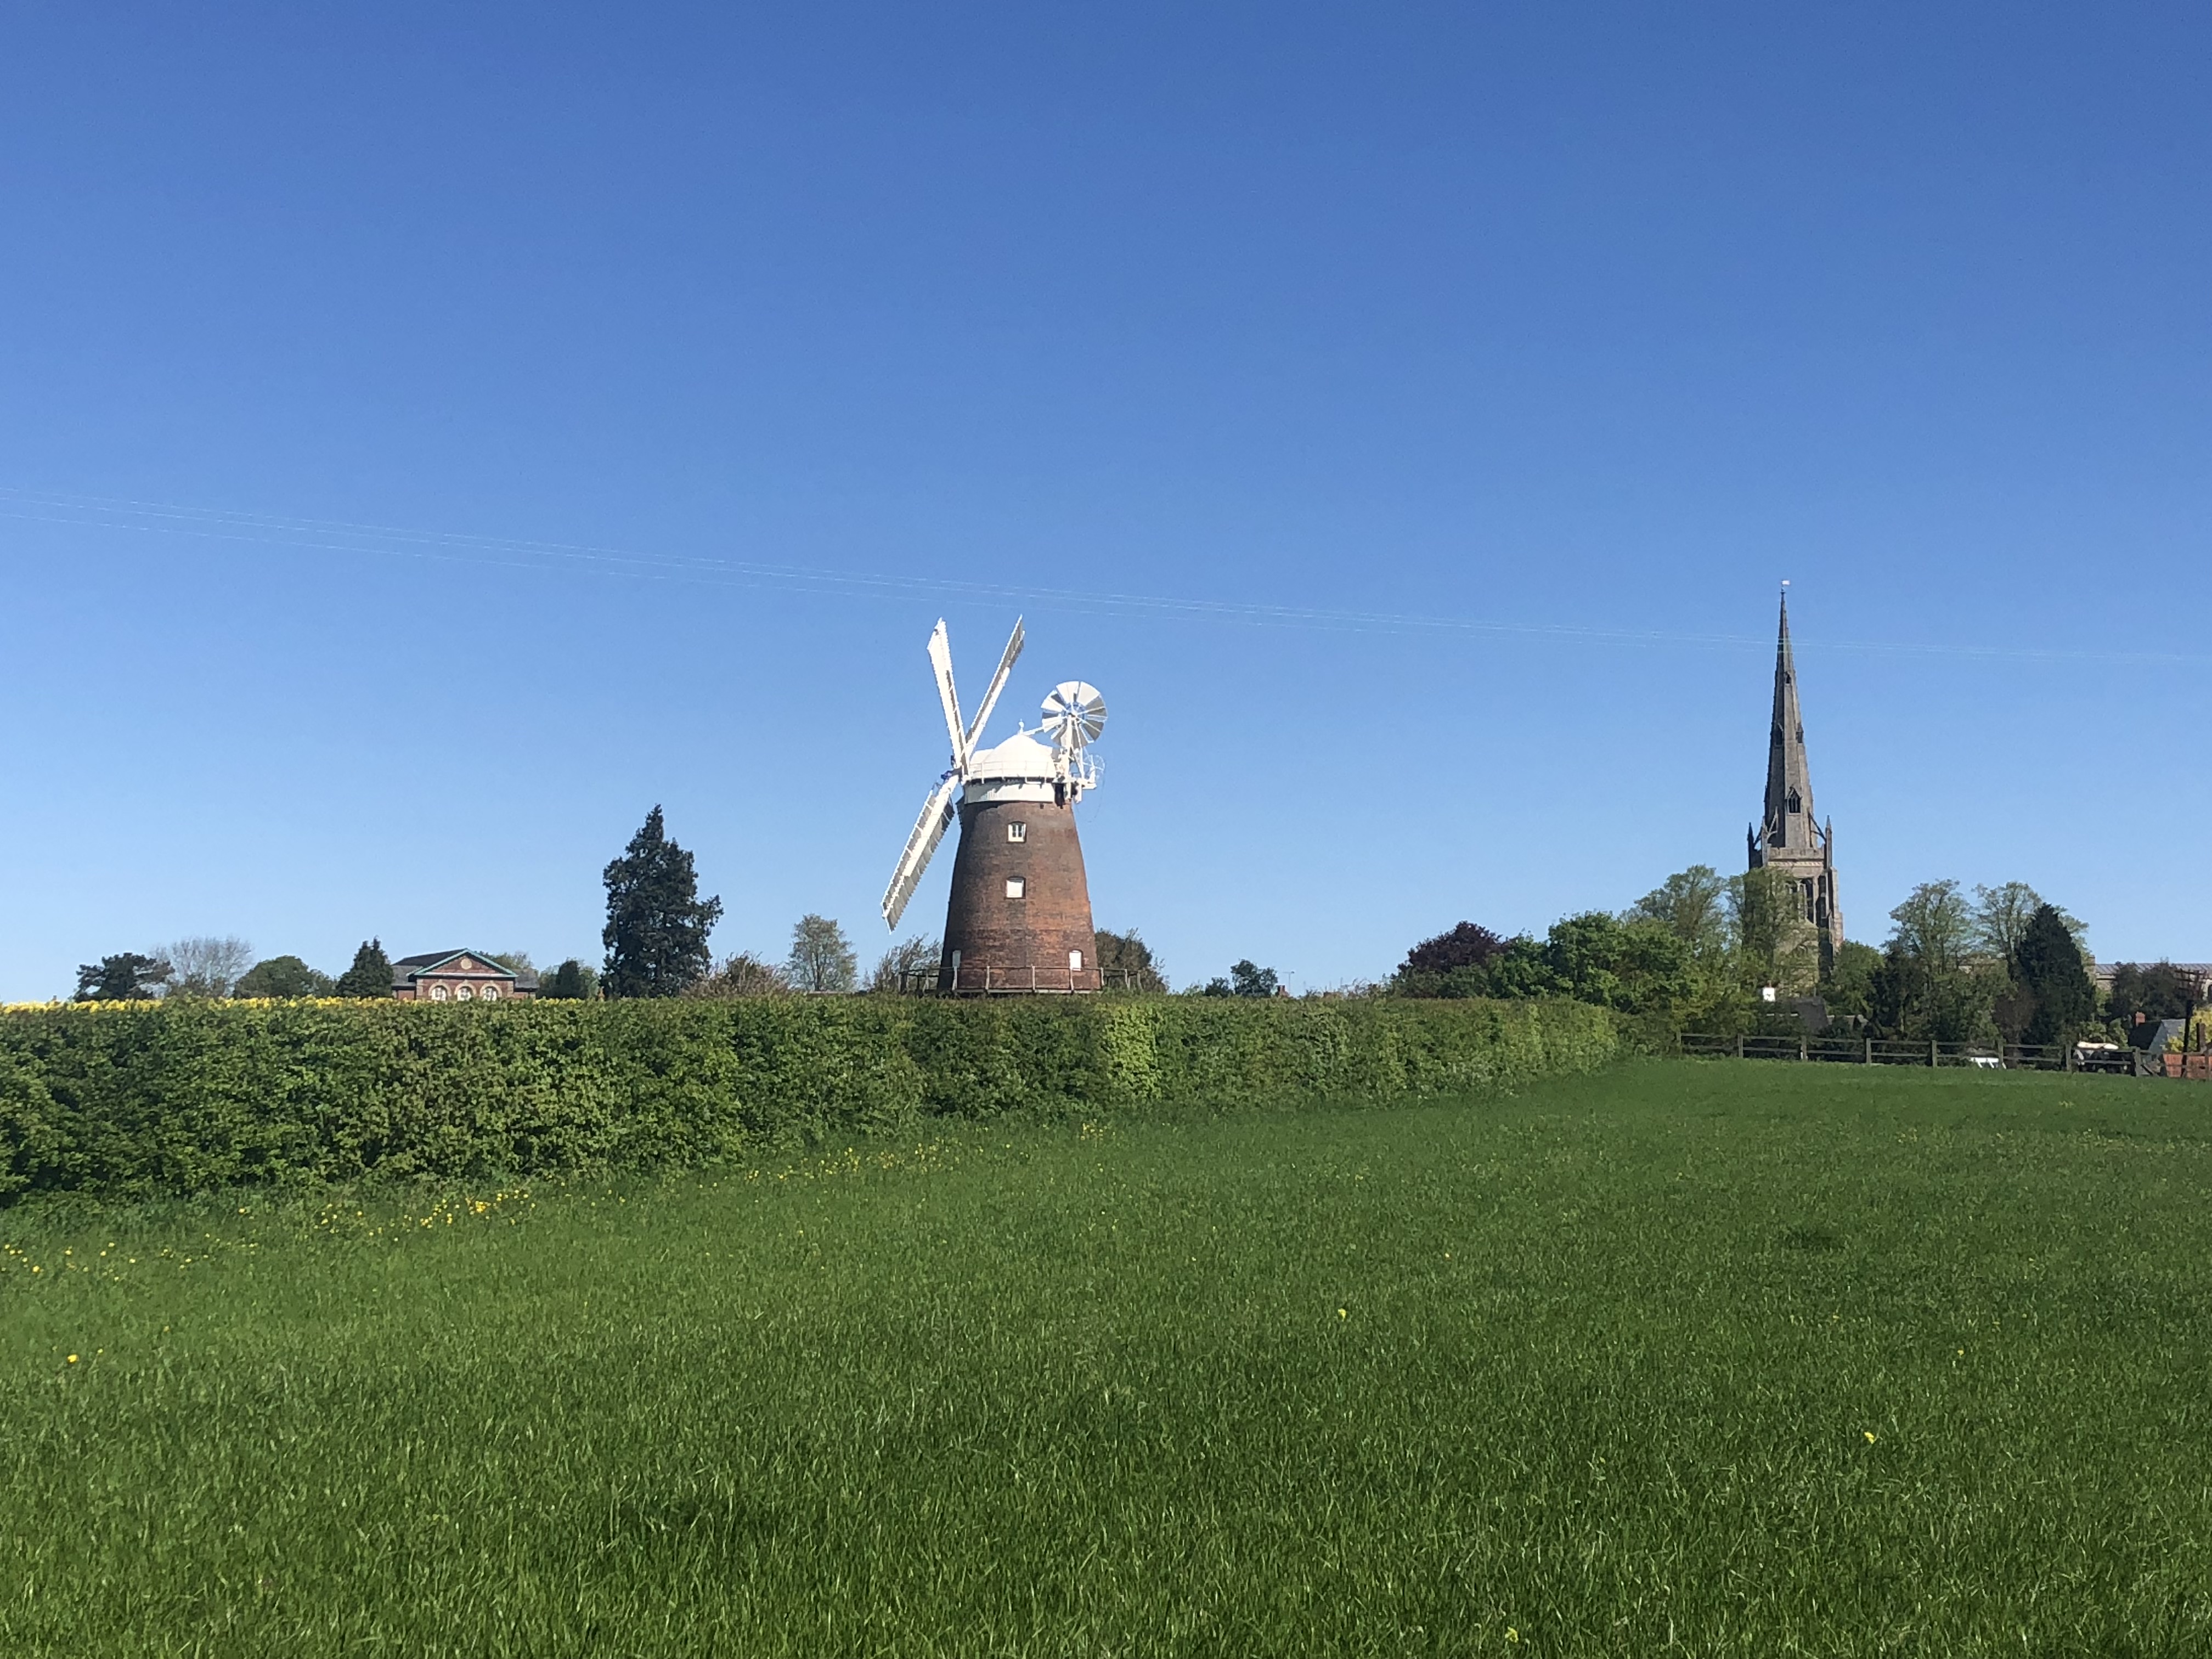 The mill, a red brick building with white sails and top sits in the background behind a field and hedge, adjacent to the village church.